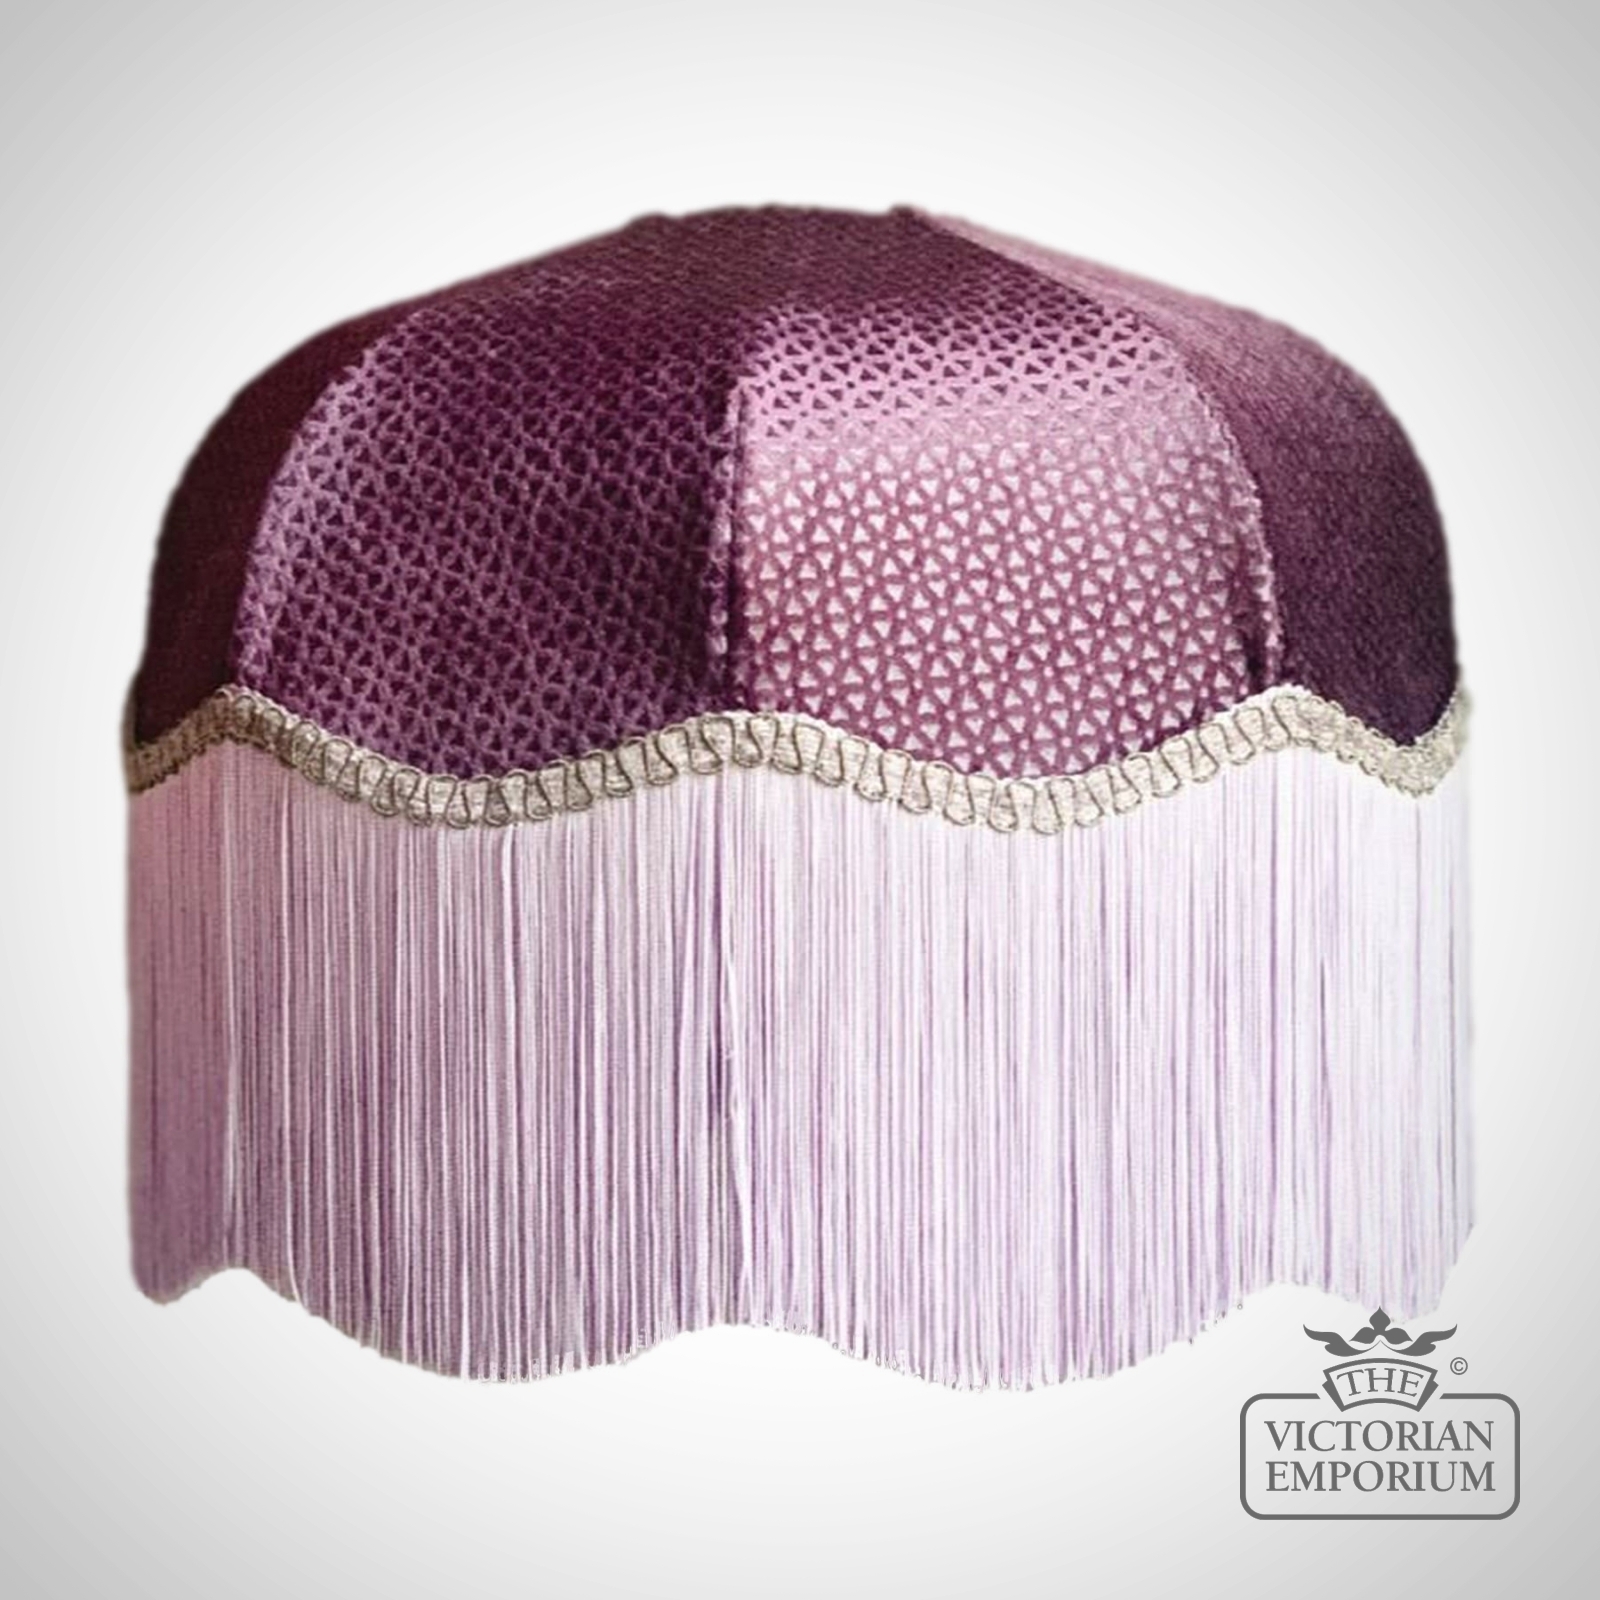 Peninsula Deluxe Art Deco Decorative Fringed Lamp Shade in a Choice of Sizes